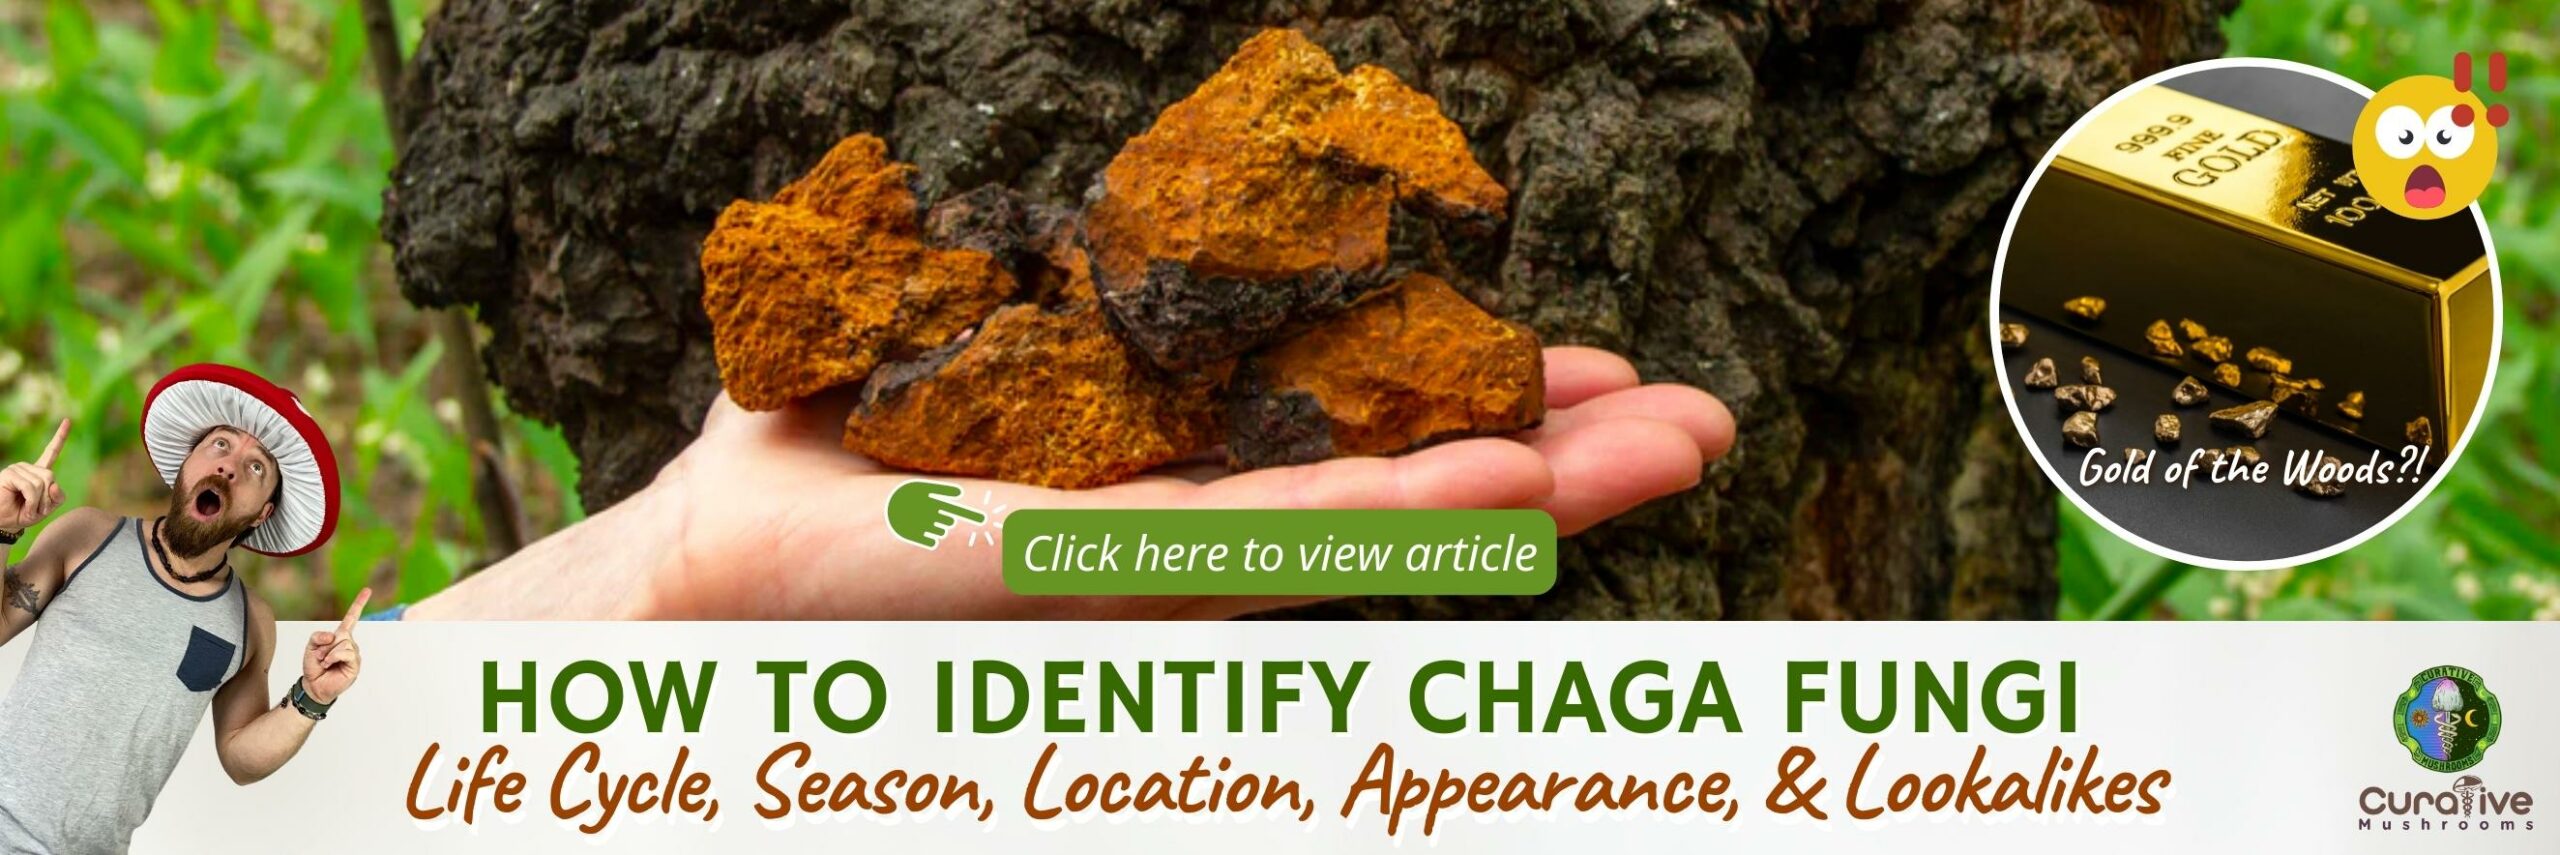 How to Identify Chaga Fungi - Life Cycle, Season, Location, Appearance, & Lookalikes - Click here to view